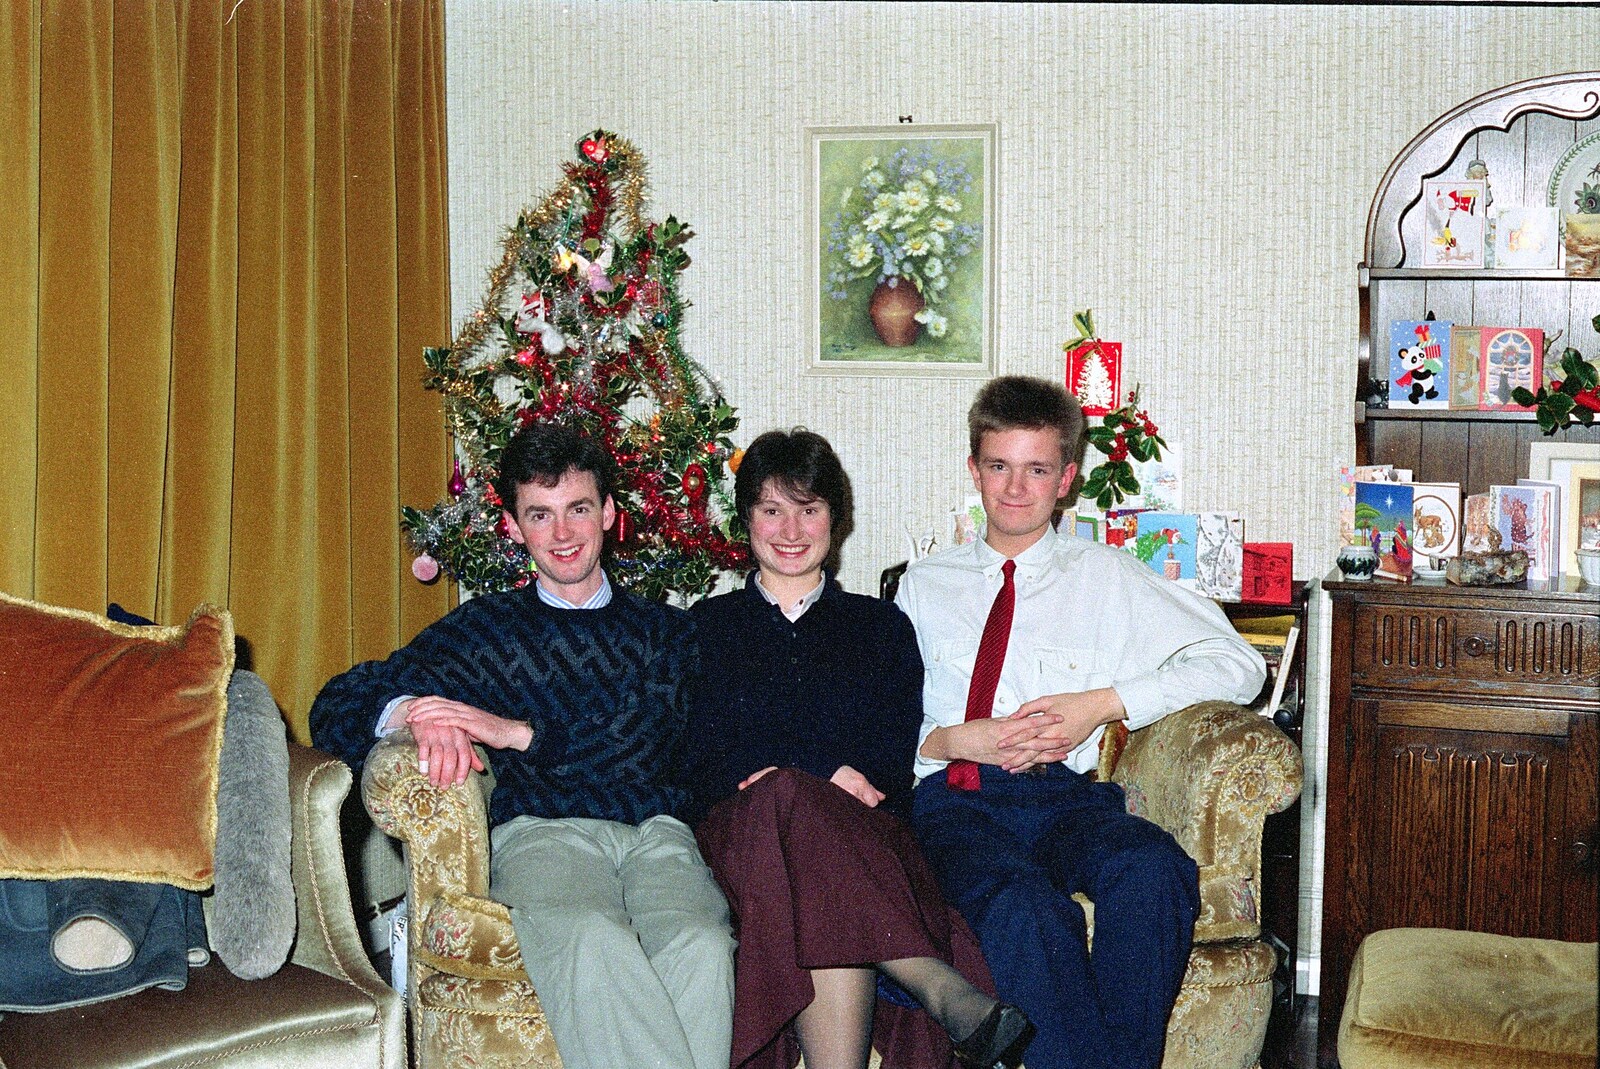 John, Angela and Nosher from Uni: A Dinner Party, Harbertonford and Buckfastleigh, Devon - 24th December 1988